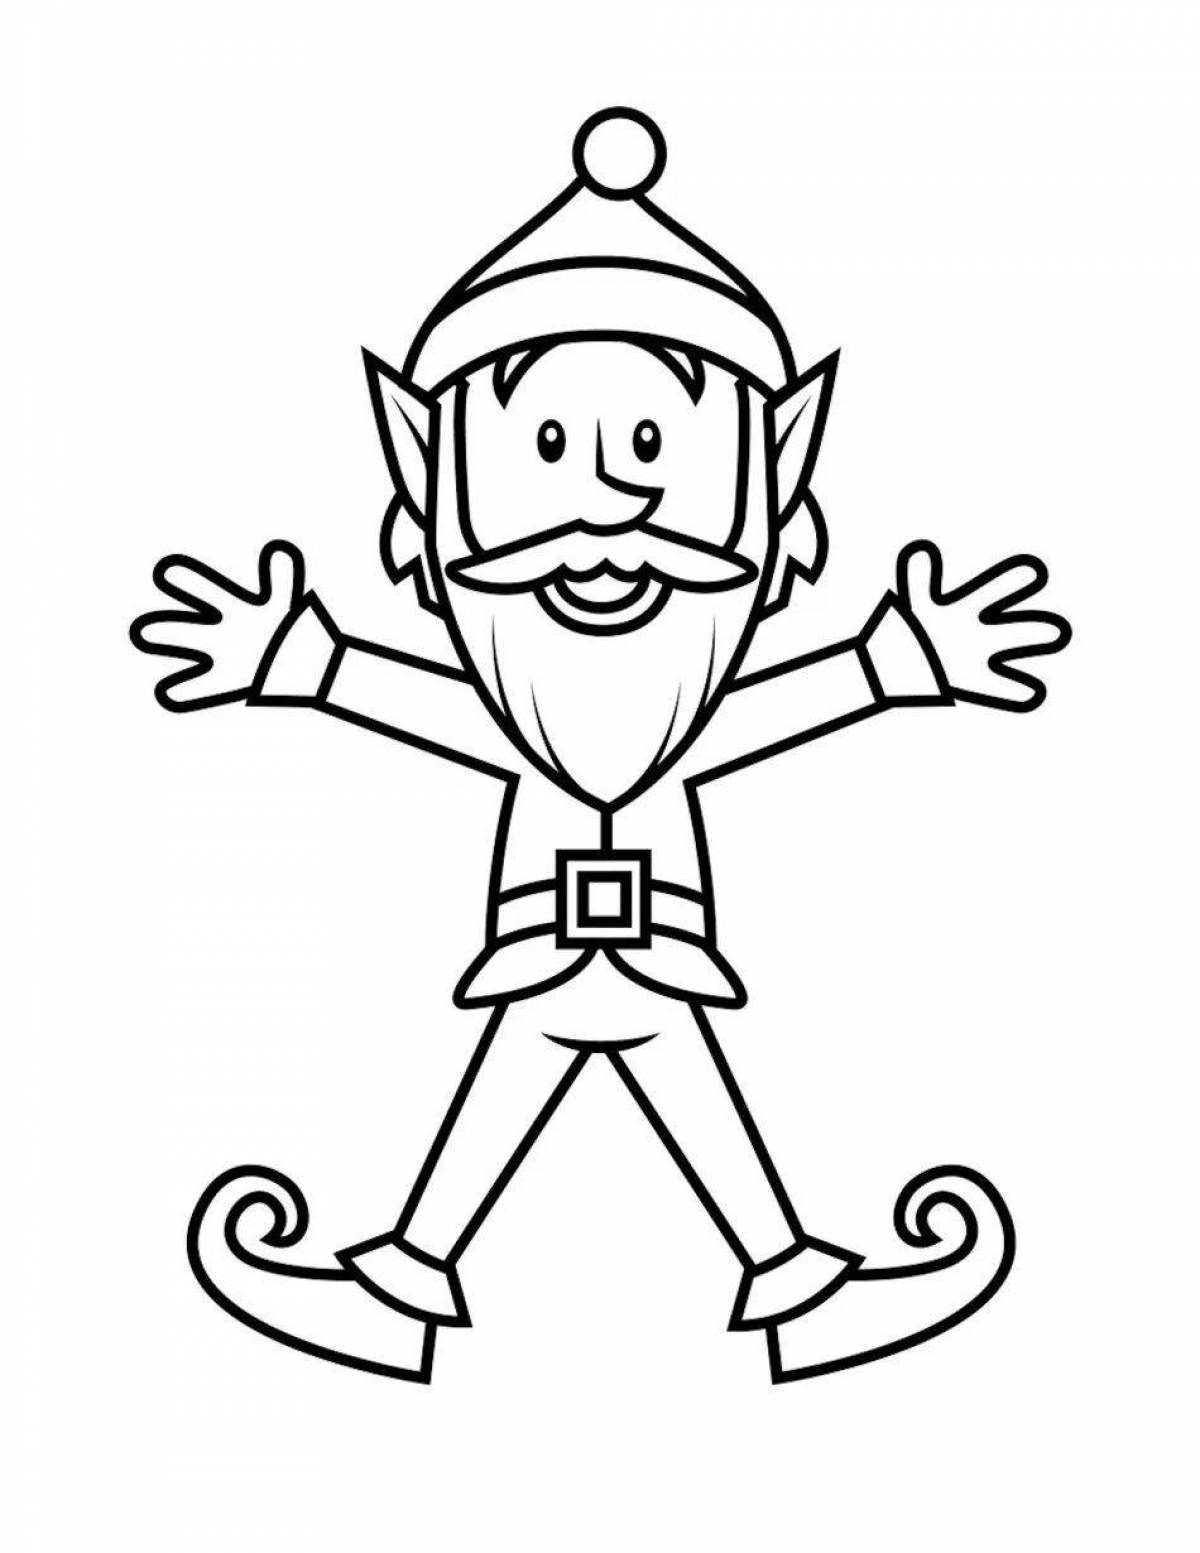 Busy coloring elf for kids